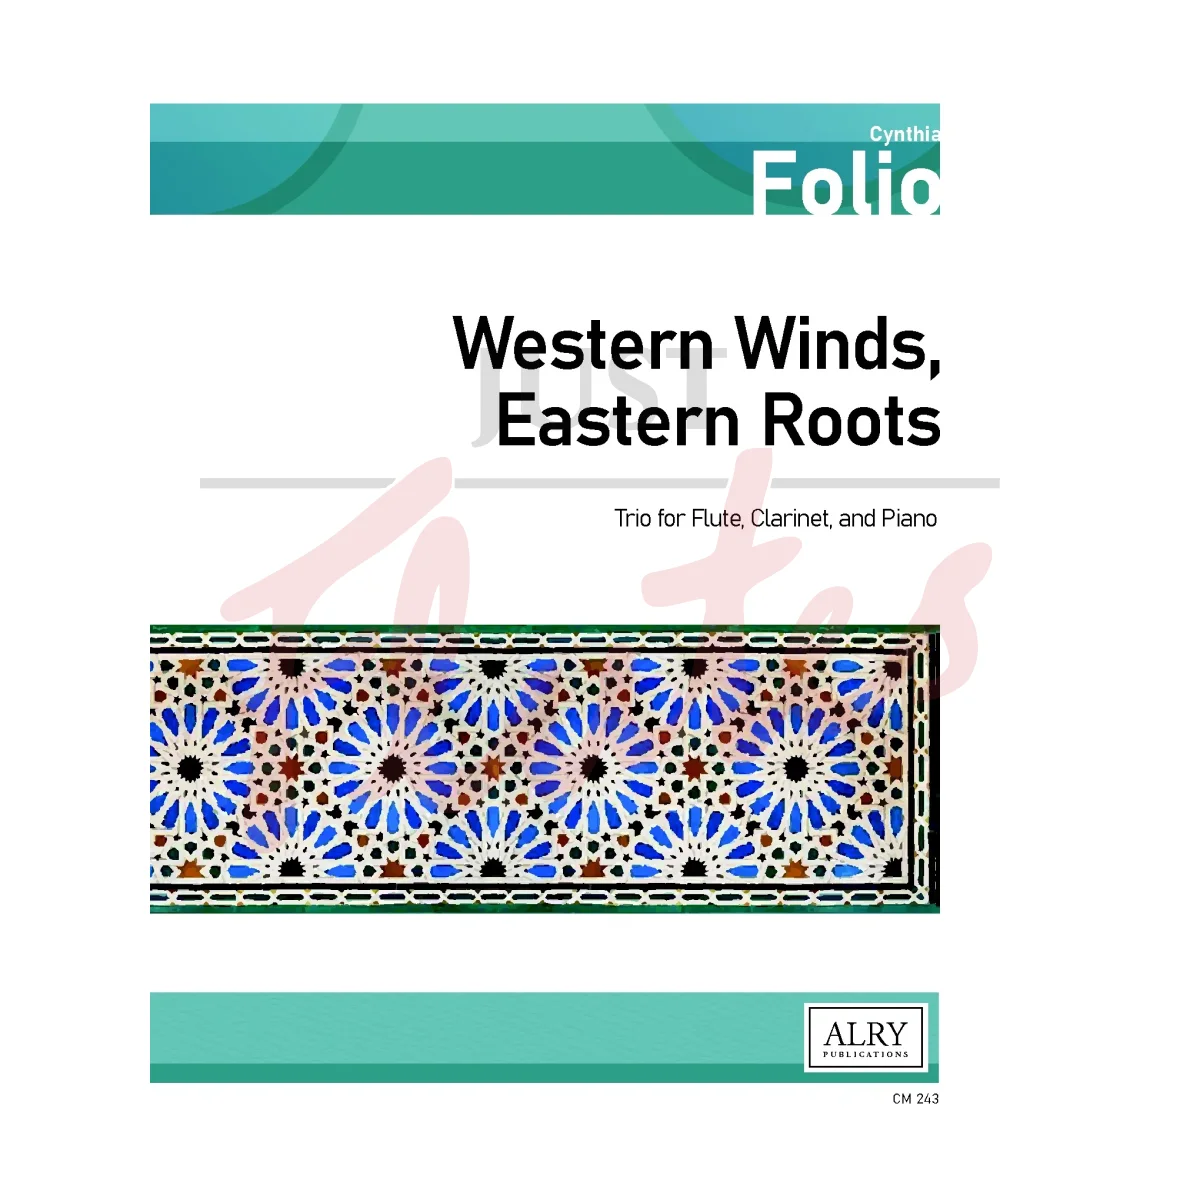 Western Winds, Eastern Roots: Trio for Flute, Clarinet and Piano